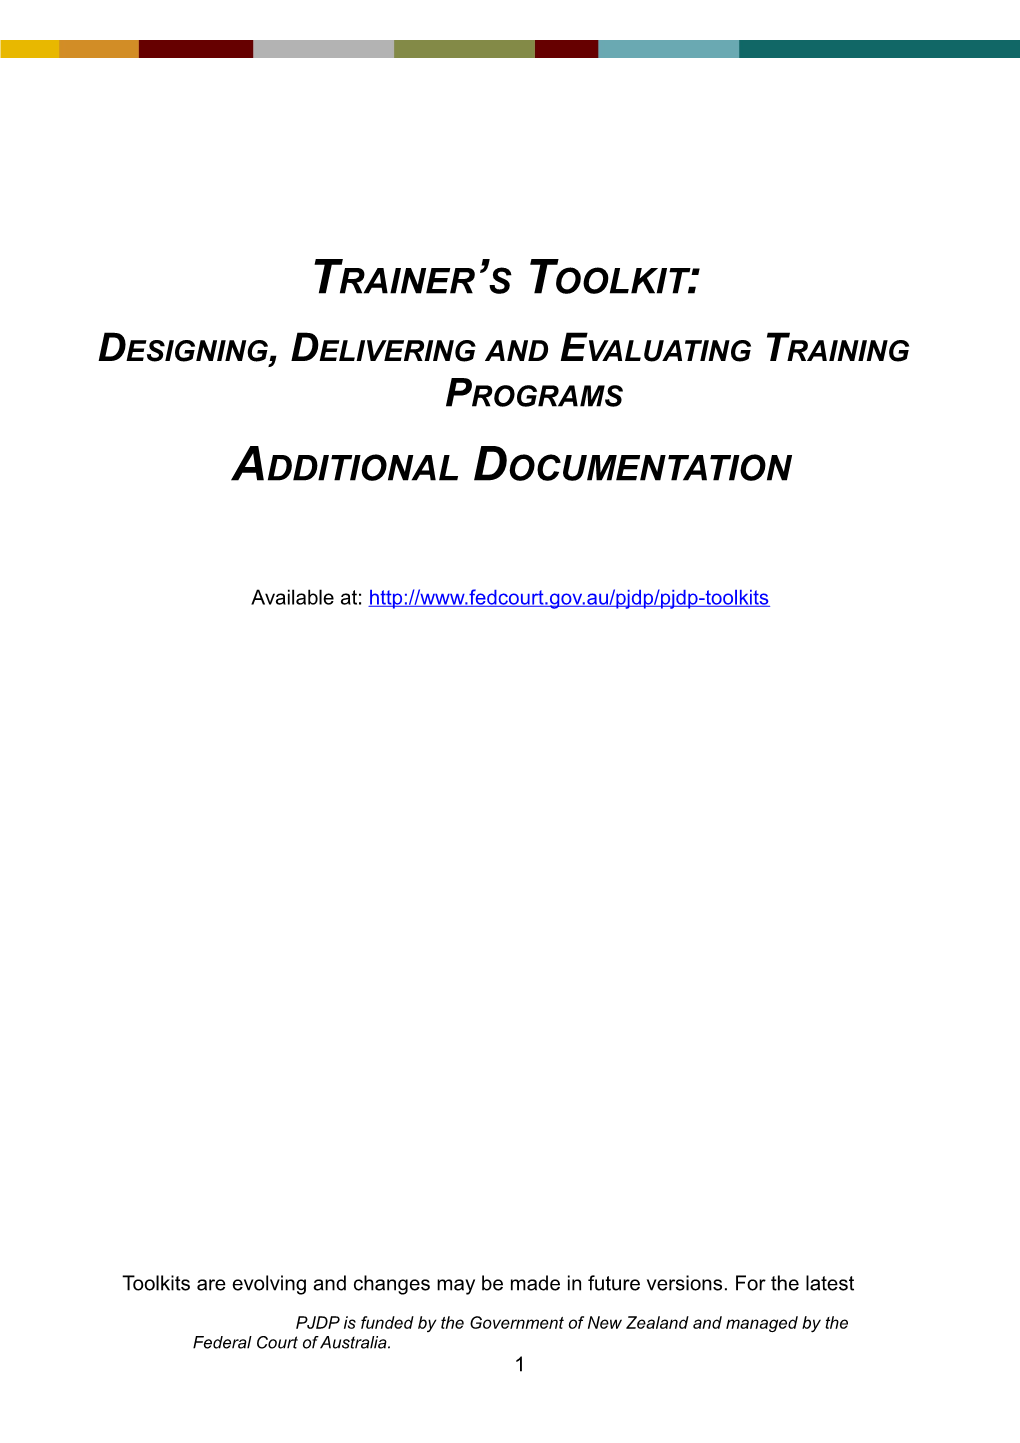 Trainer's Toolkit Additional Resources